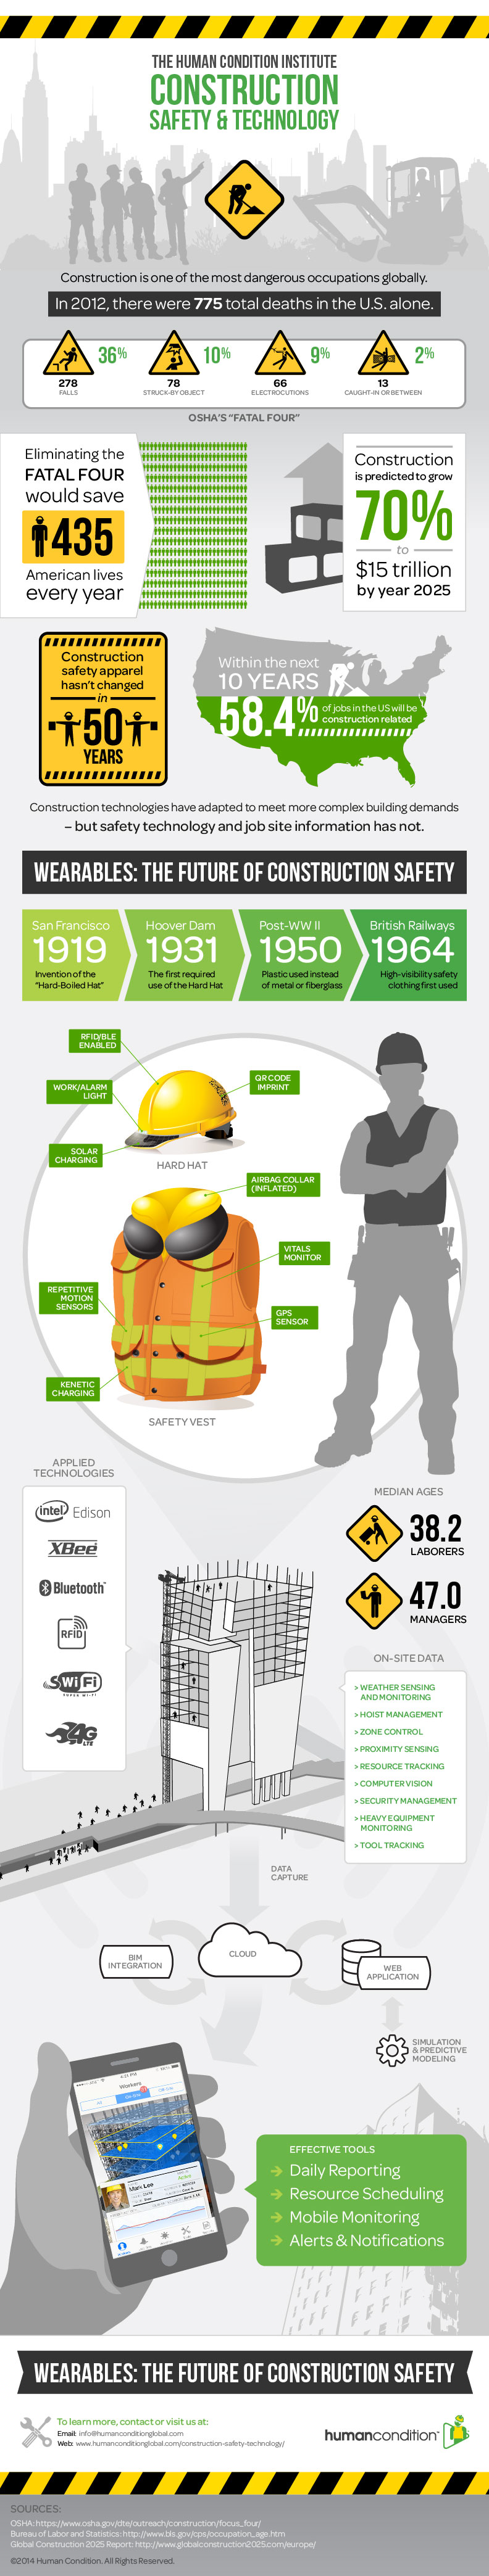 Human Condition Construction Safety Infographic